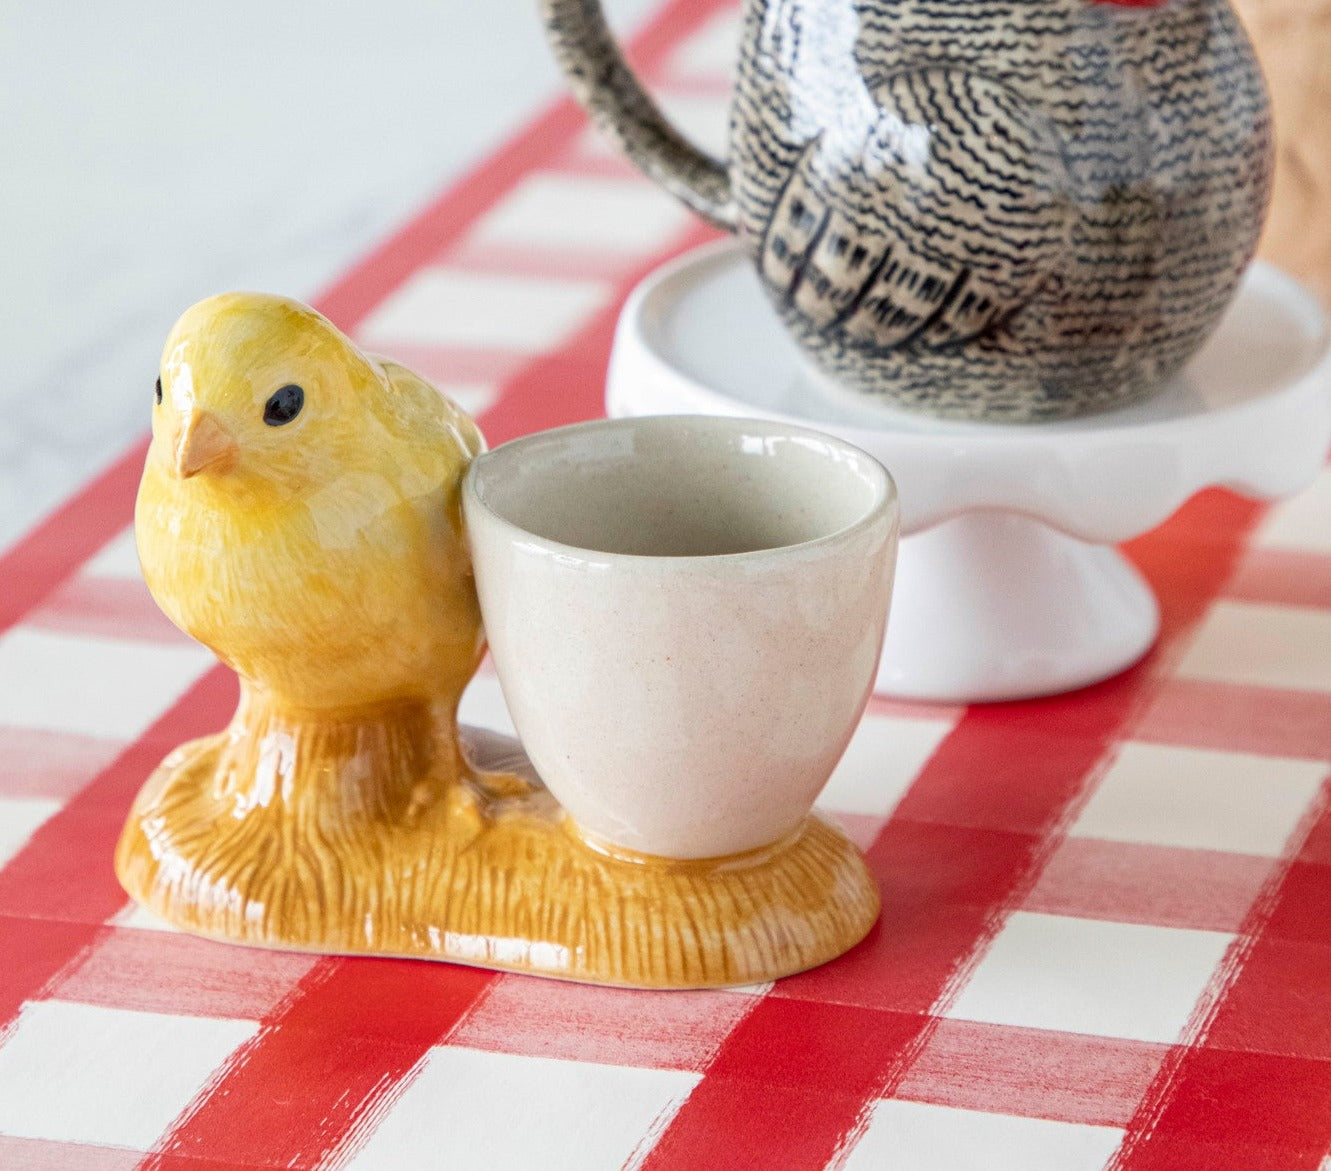 A yellow chicken, one of the Farm Animal Ceramics from Quail, sits on a red and white checkered tablecloth.